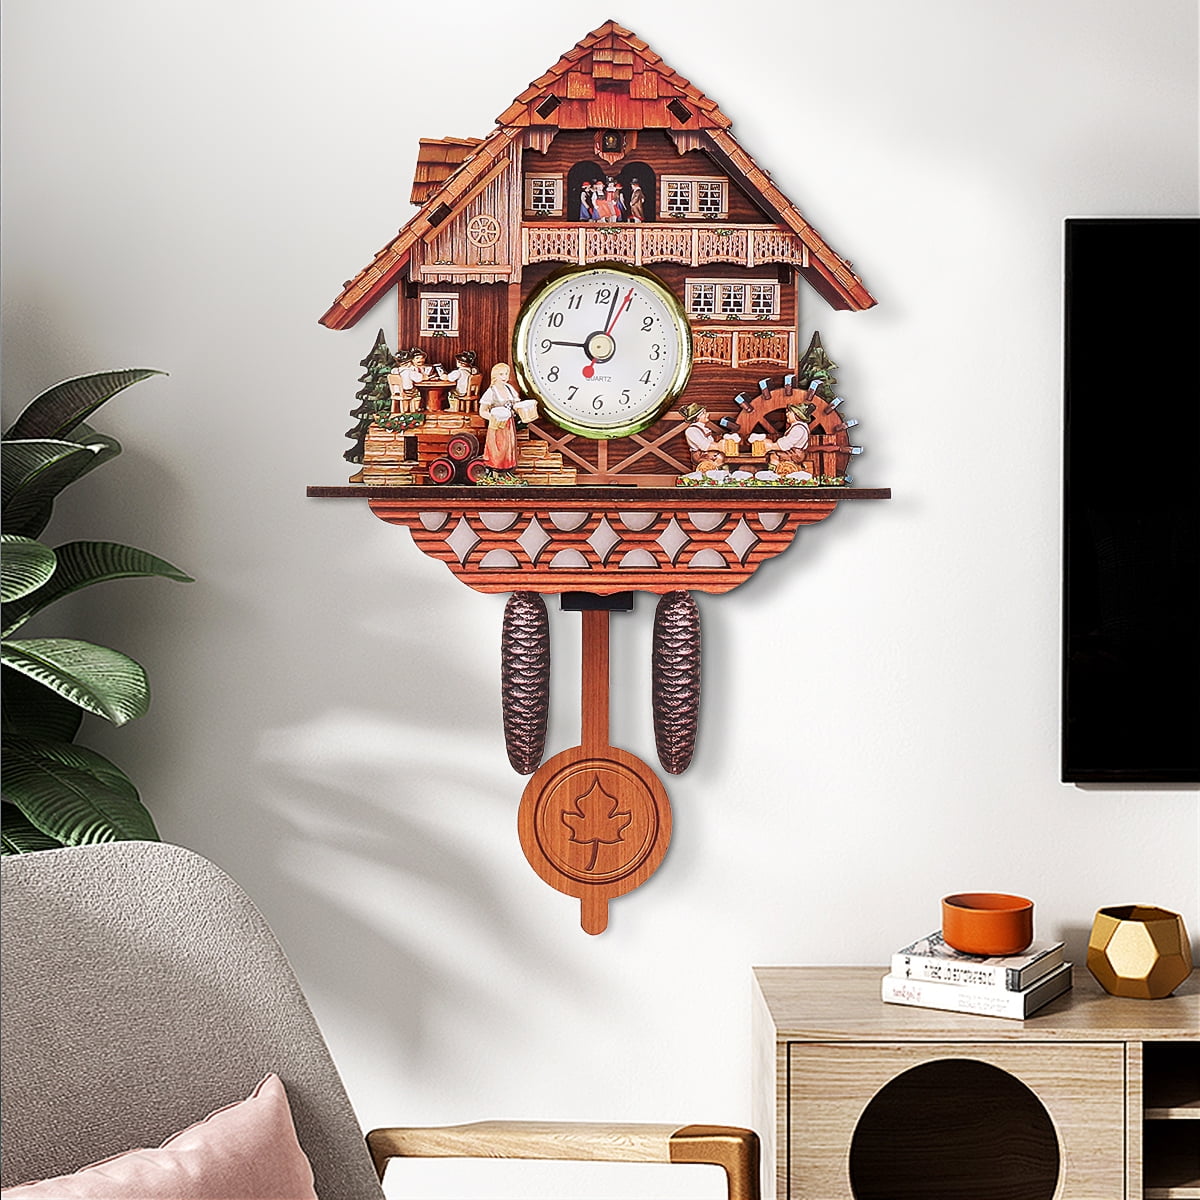 Handcraft Cuckoo Wall Clock Wooden Auto Swing Home Room Office Decorations 